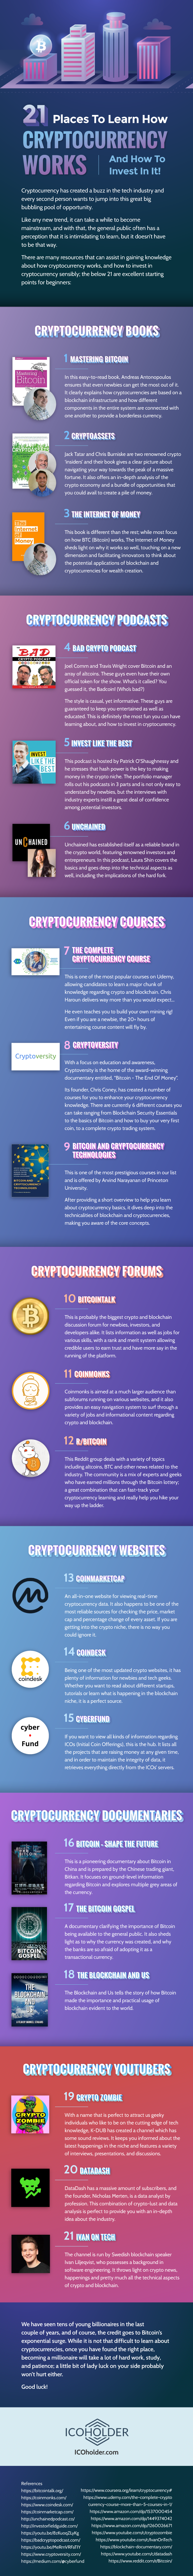 how to invest in cryptocurrencies